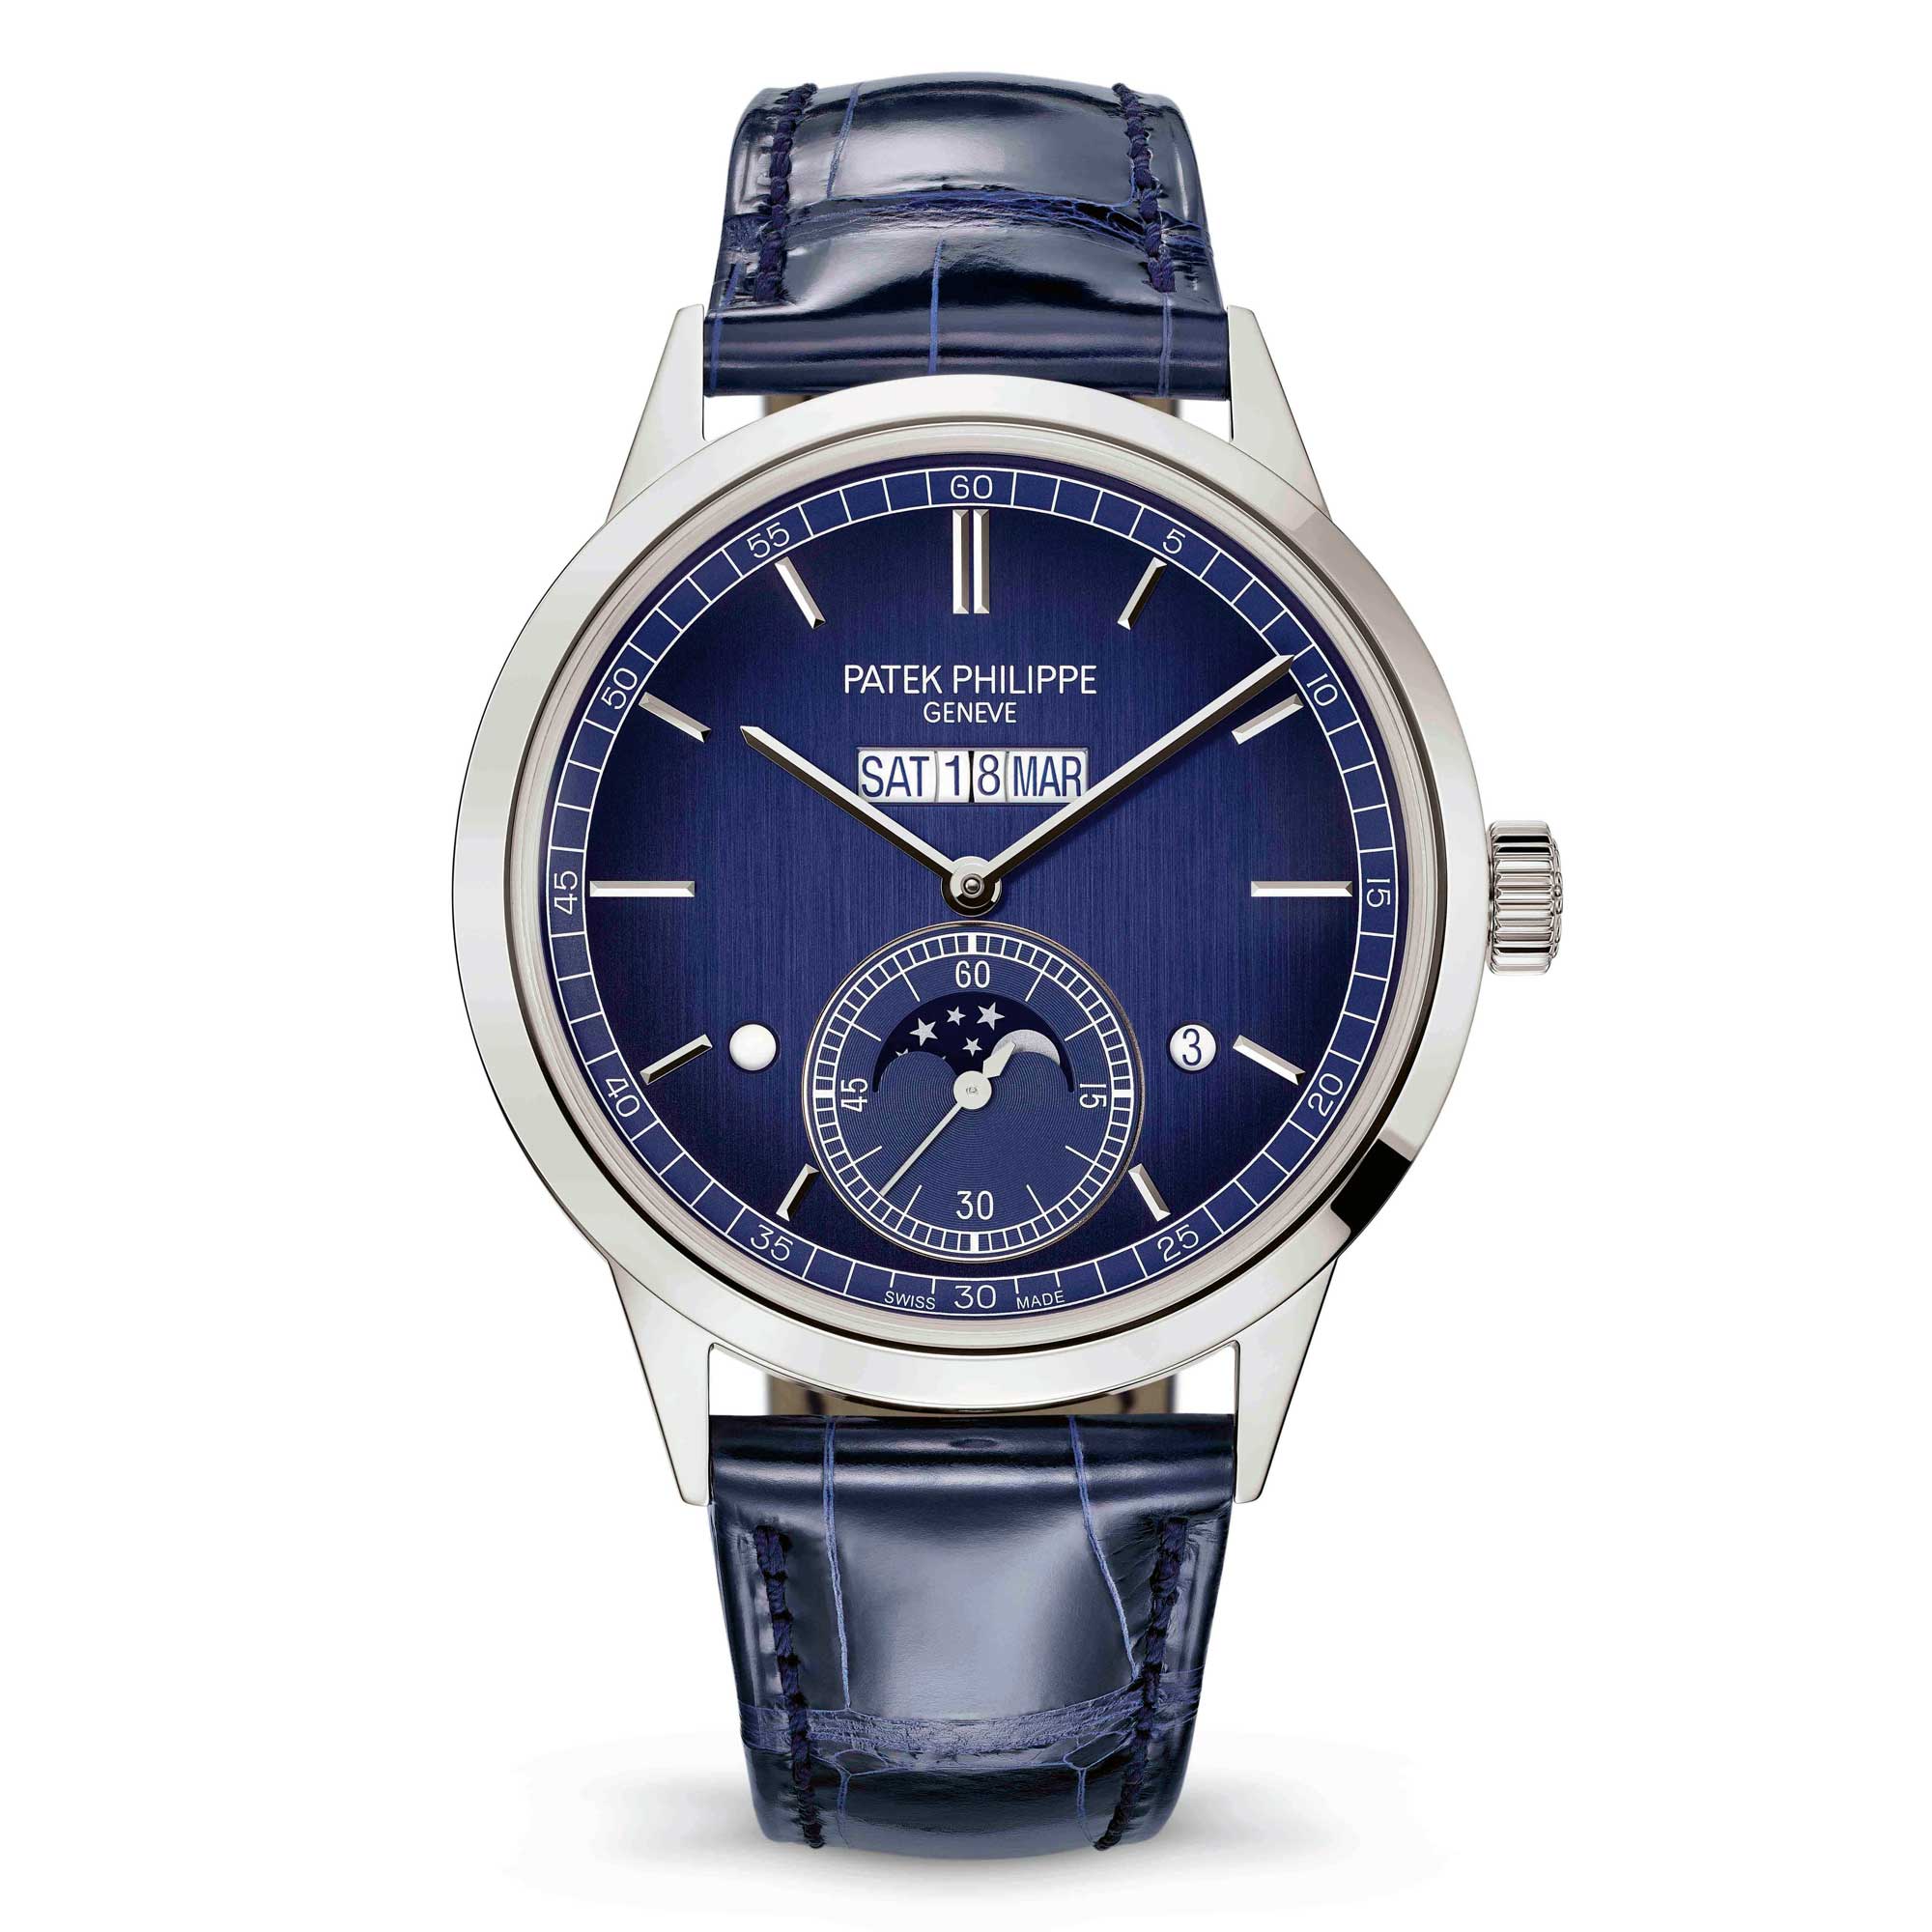 Also launched in 2021, the world’s first in-line perpetual calendar wristwatch Ref. 5236